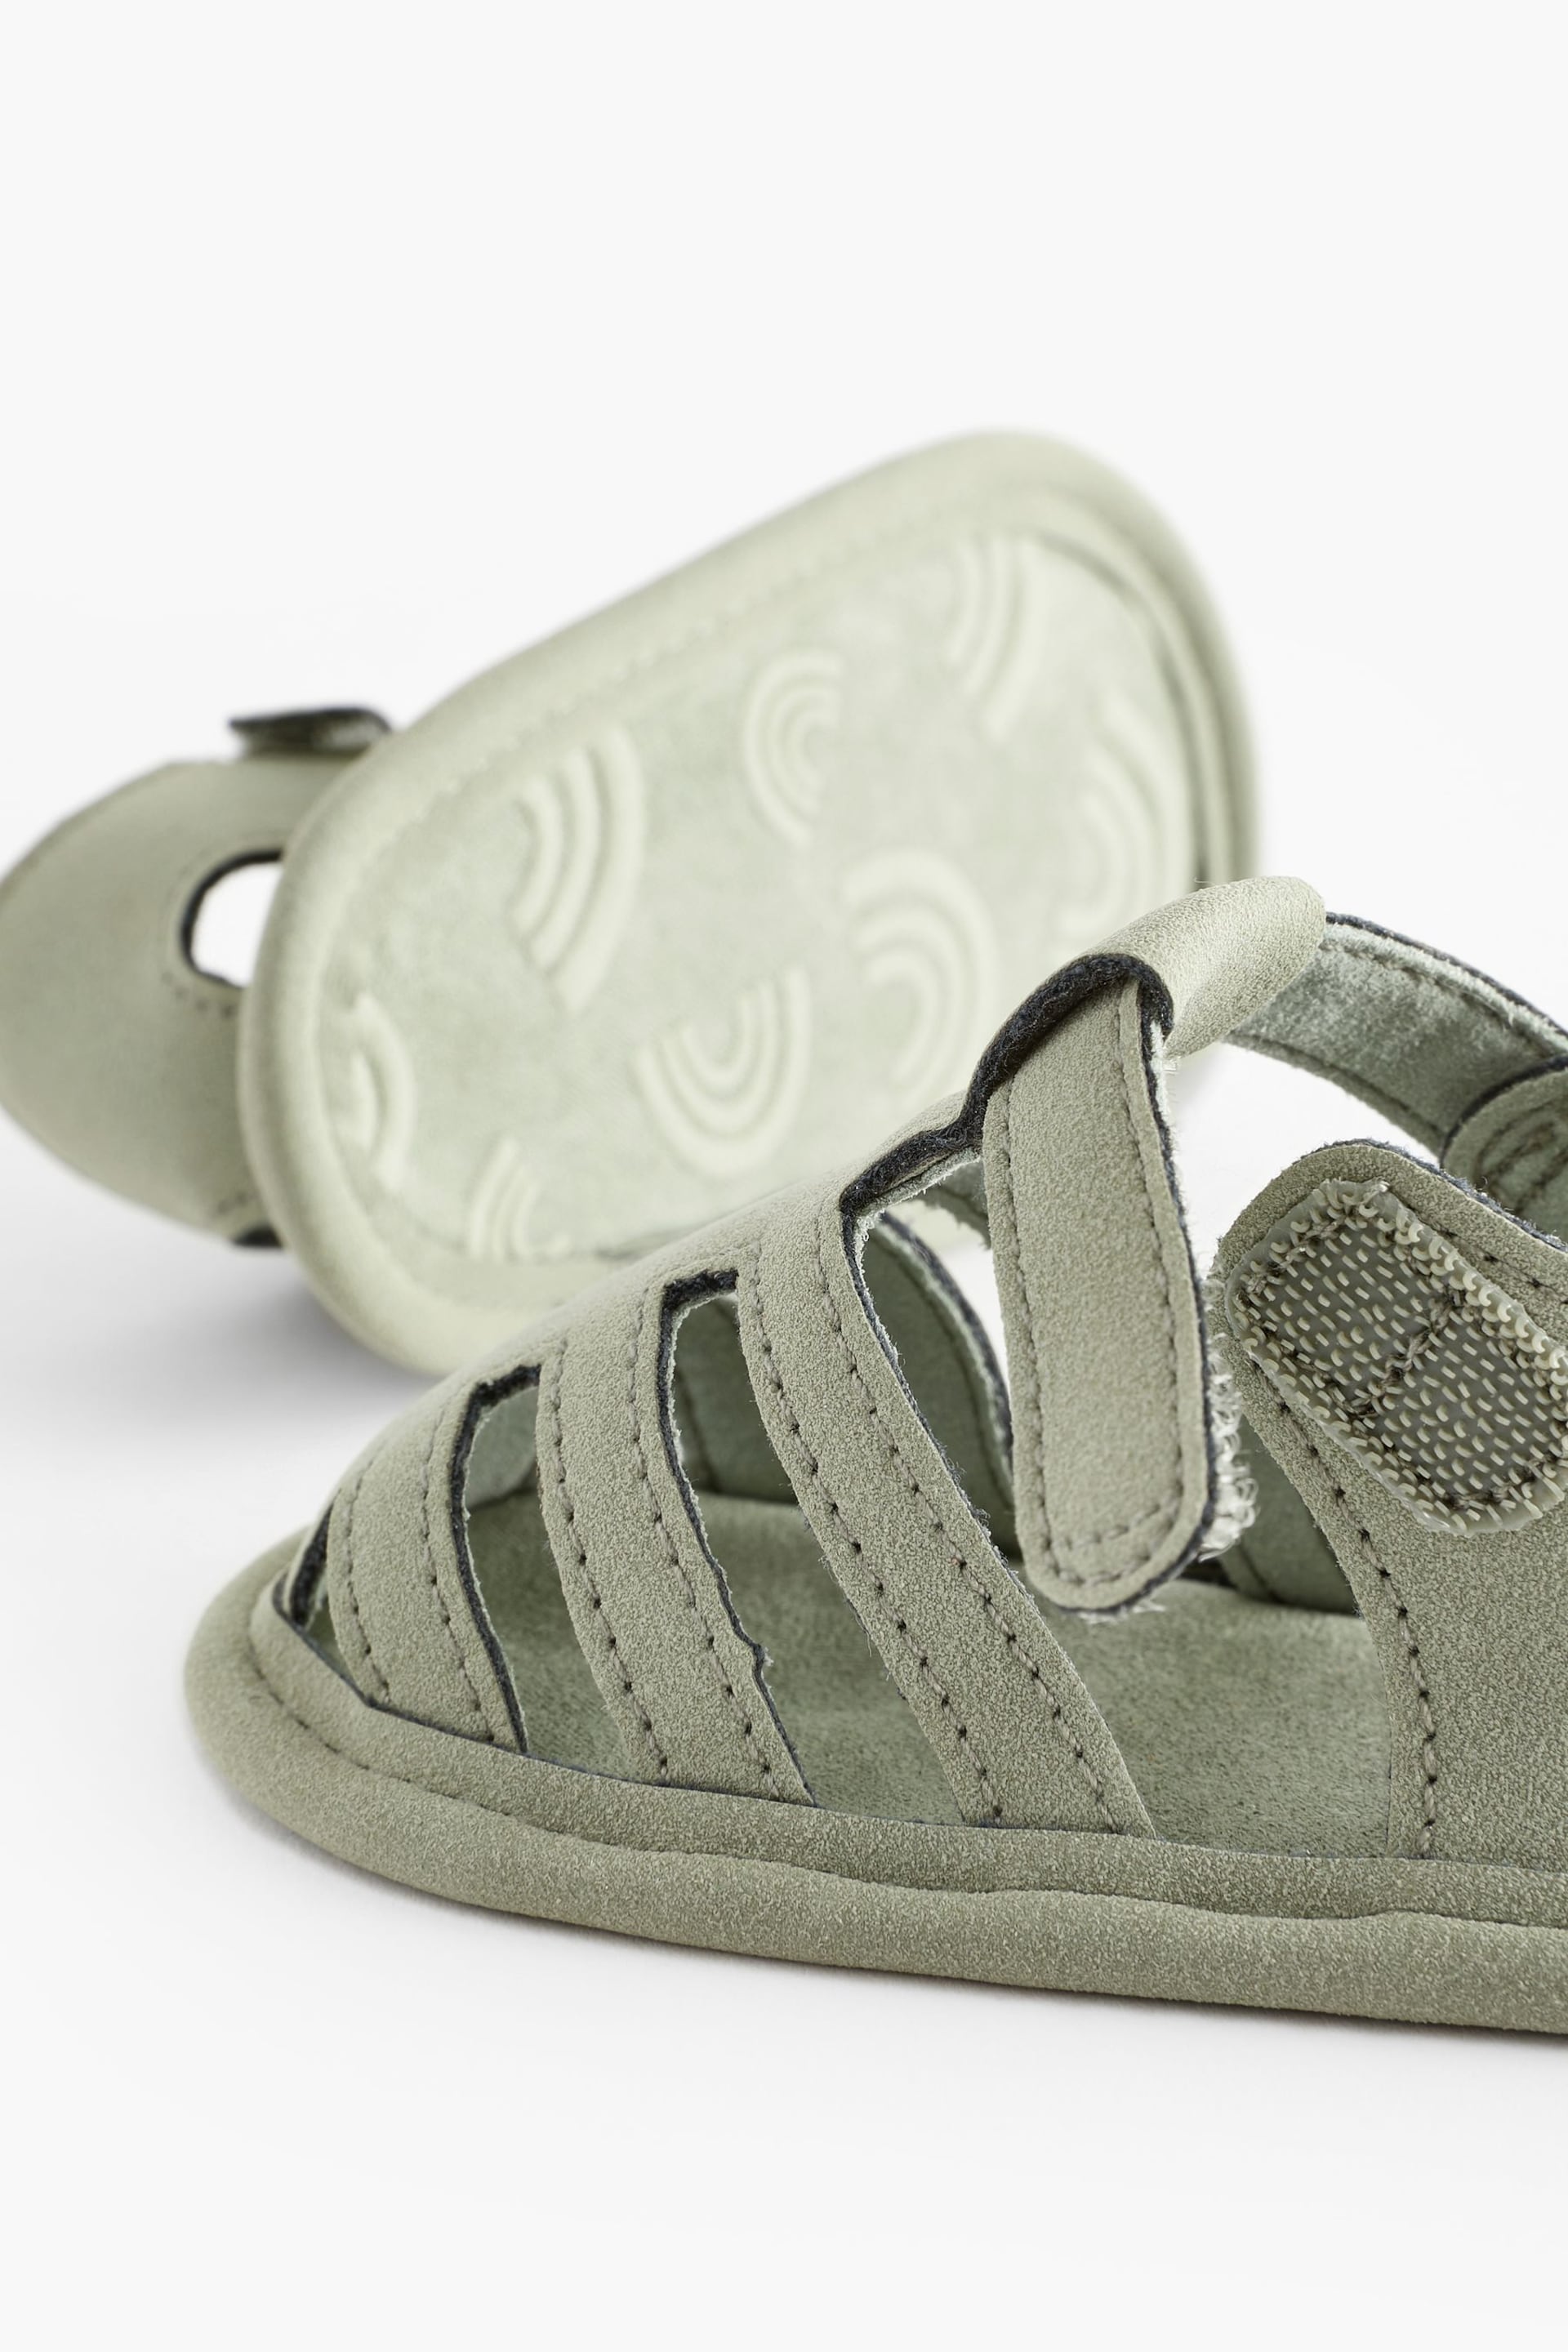 Sage Green Fisherman Baby Sandals (0-24mths) - Image 6 of 8